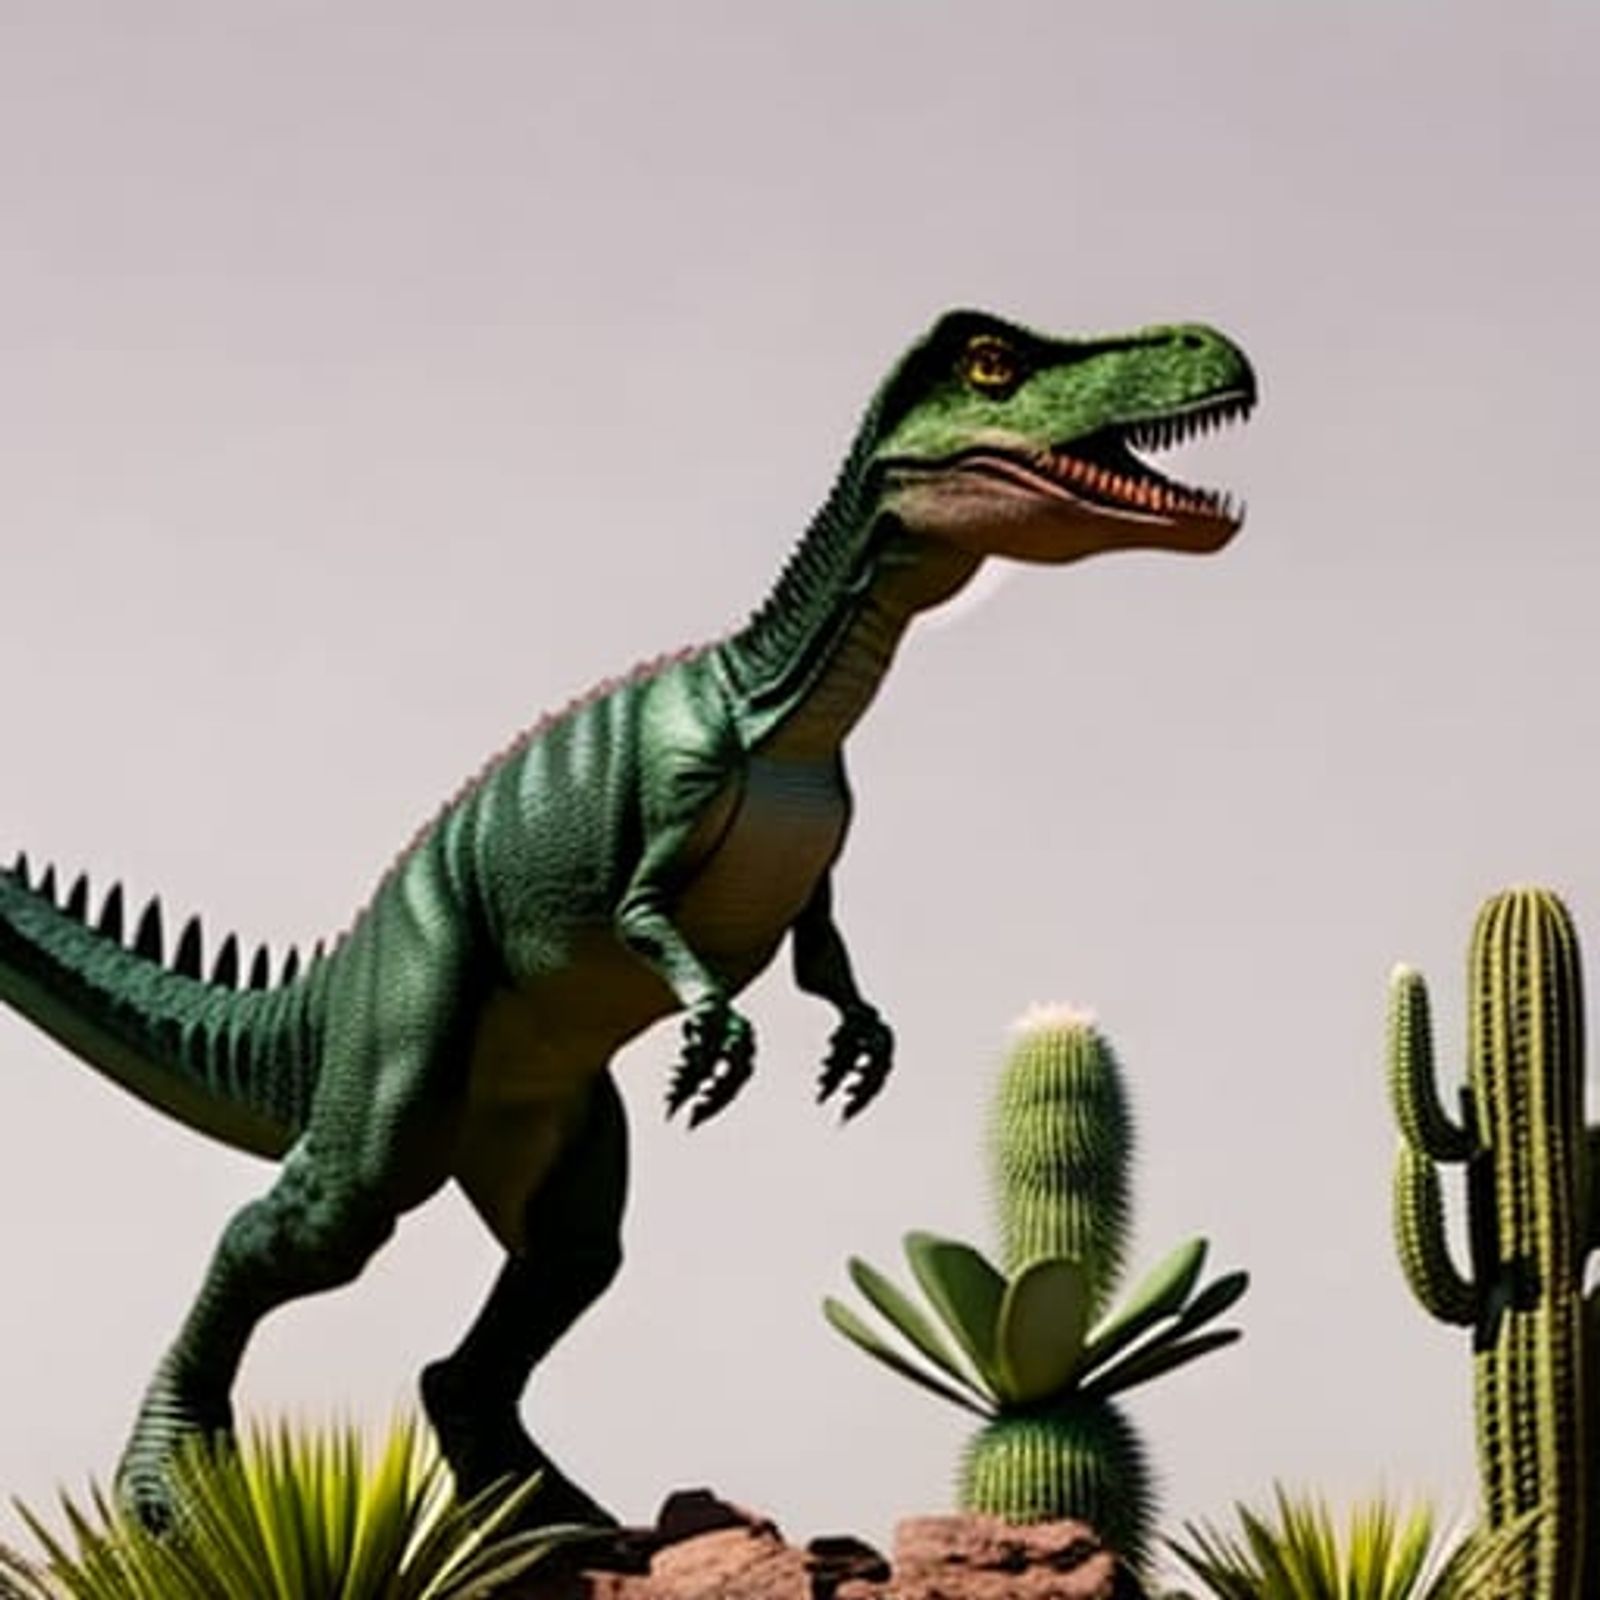 Jumping T-Rex dinosaur over a cactus, with some velociraptors running  alongside, Chrome Dino game, Epic cinematic awesome intricate meticulo -  AI Generated Artwork - NightCafe Creator